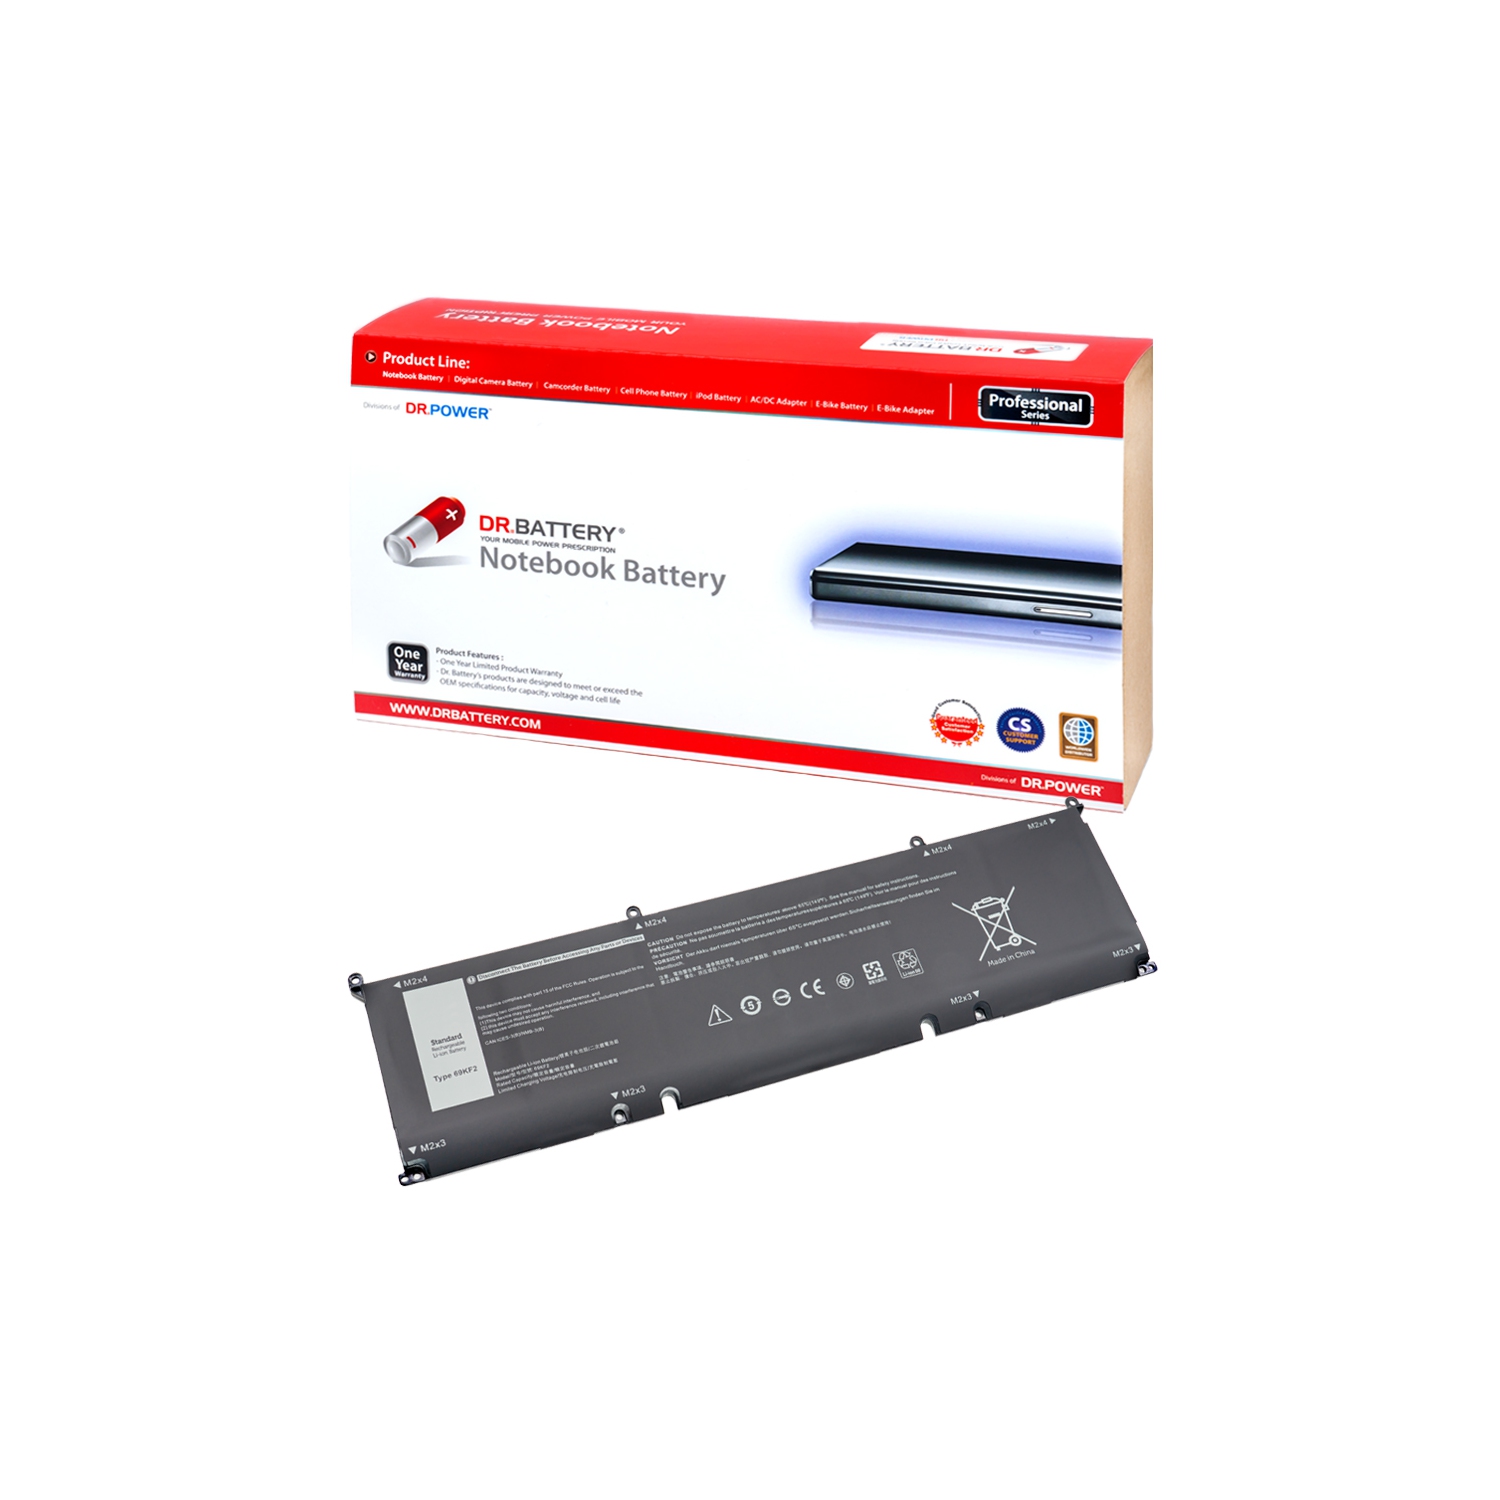 DR. BATTERY - Replacement for Dell Alienware M15 2020 M17 R3 P45E / M17 R4 / ALW15M-5758W / 69KF2 / 70N2F / M59JH [11.4V / 7545mAh / 86Wh] ***Free Shipping***